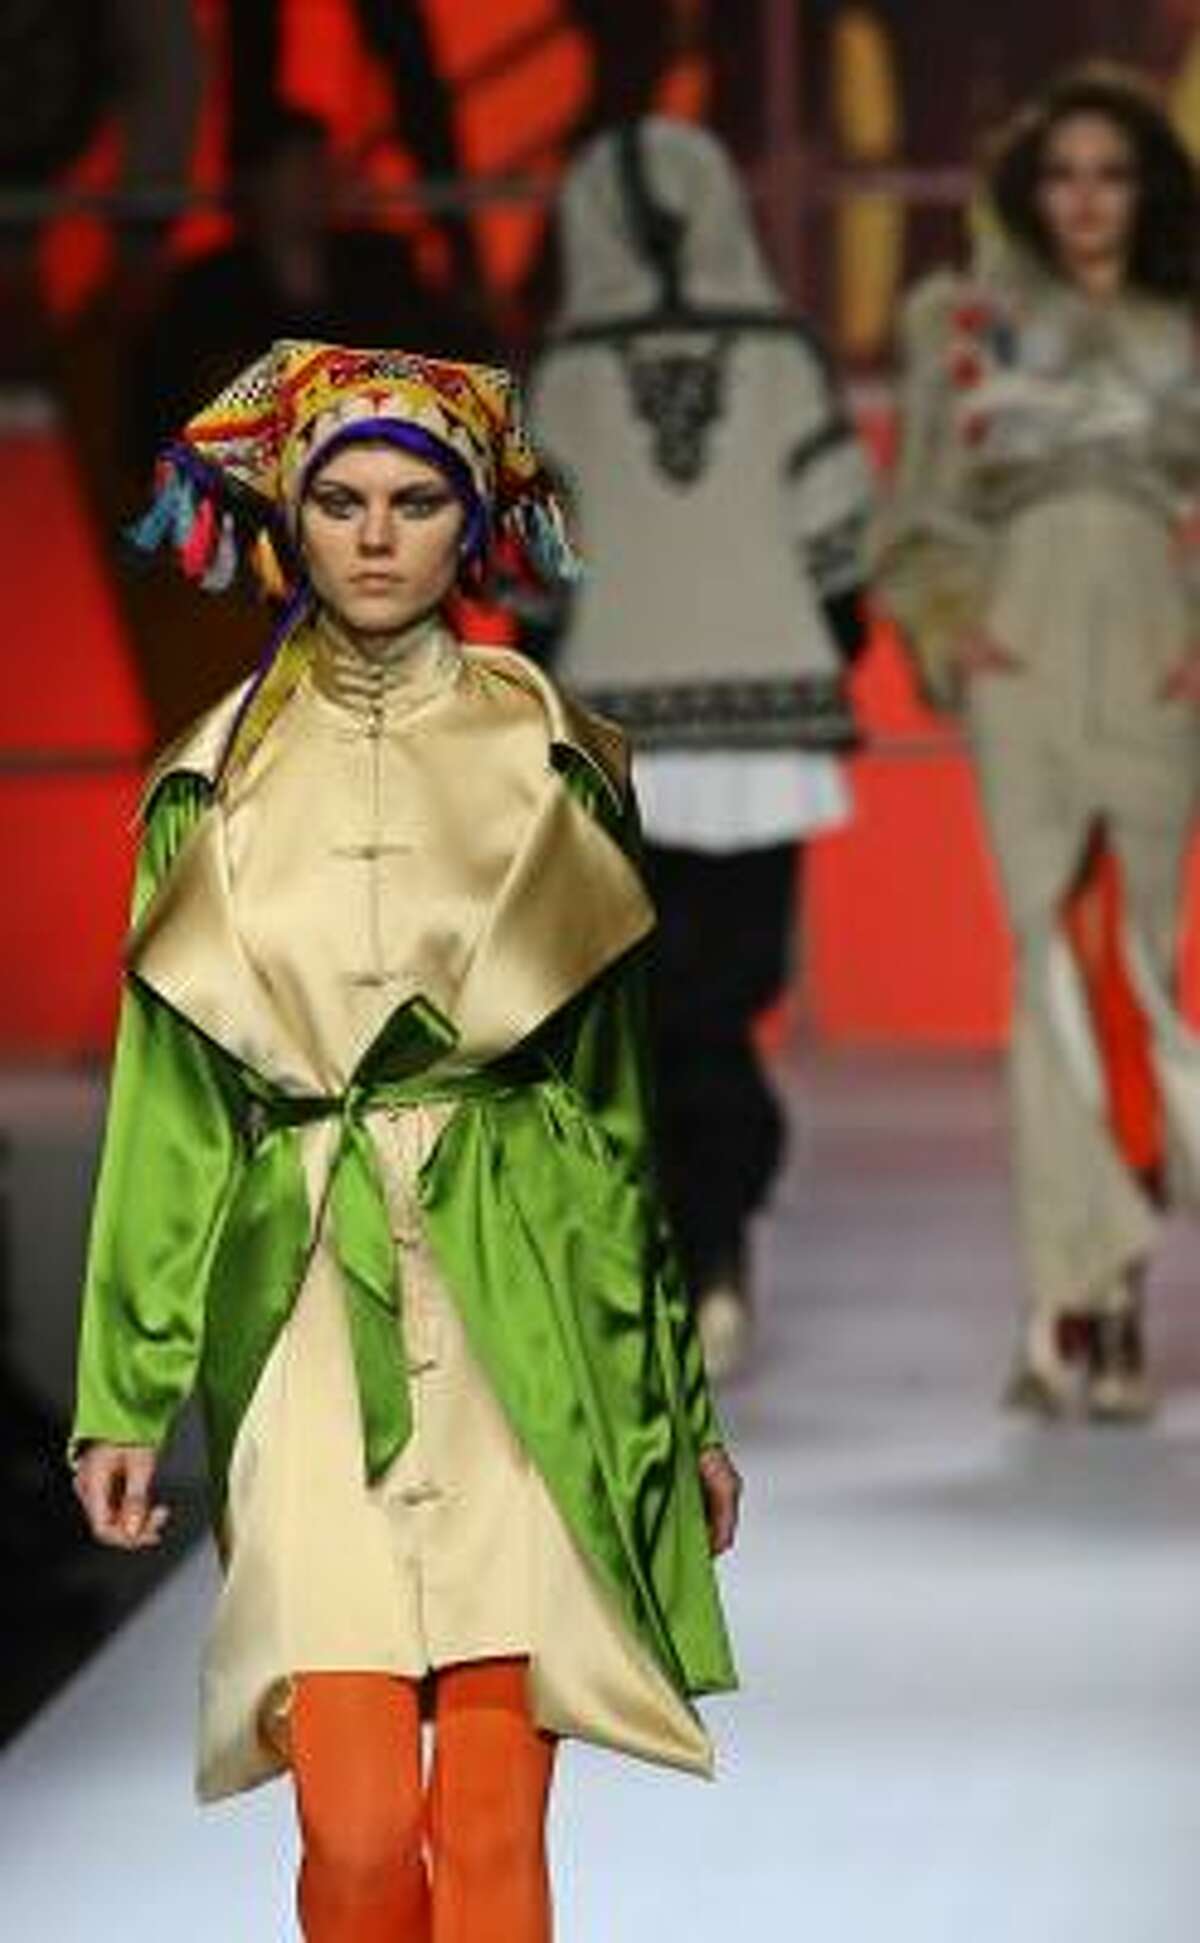 Jean Paul Gaultier's 2010 Fall-Winter ready-to-wear fashion collection at Paris Fashion Week.